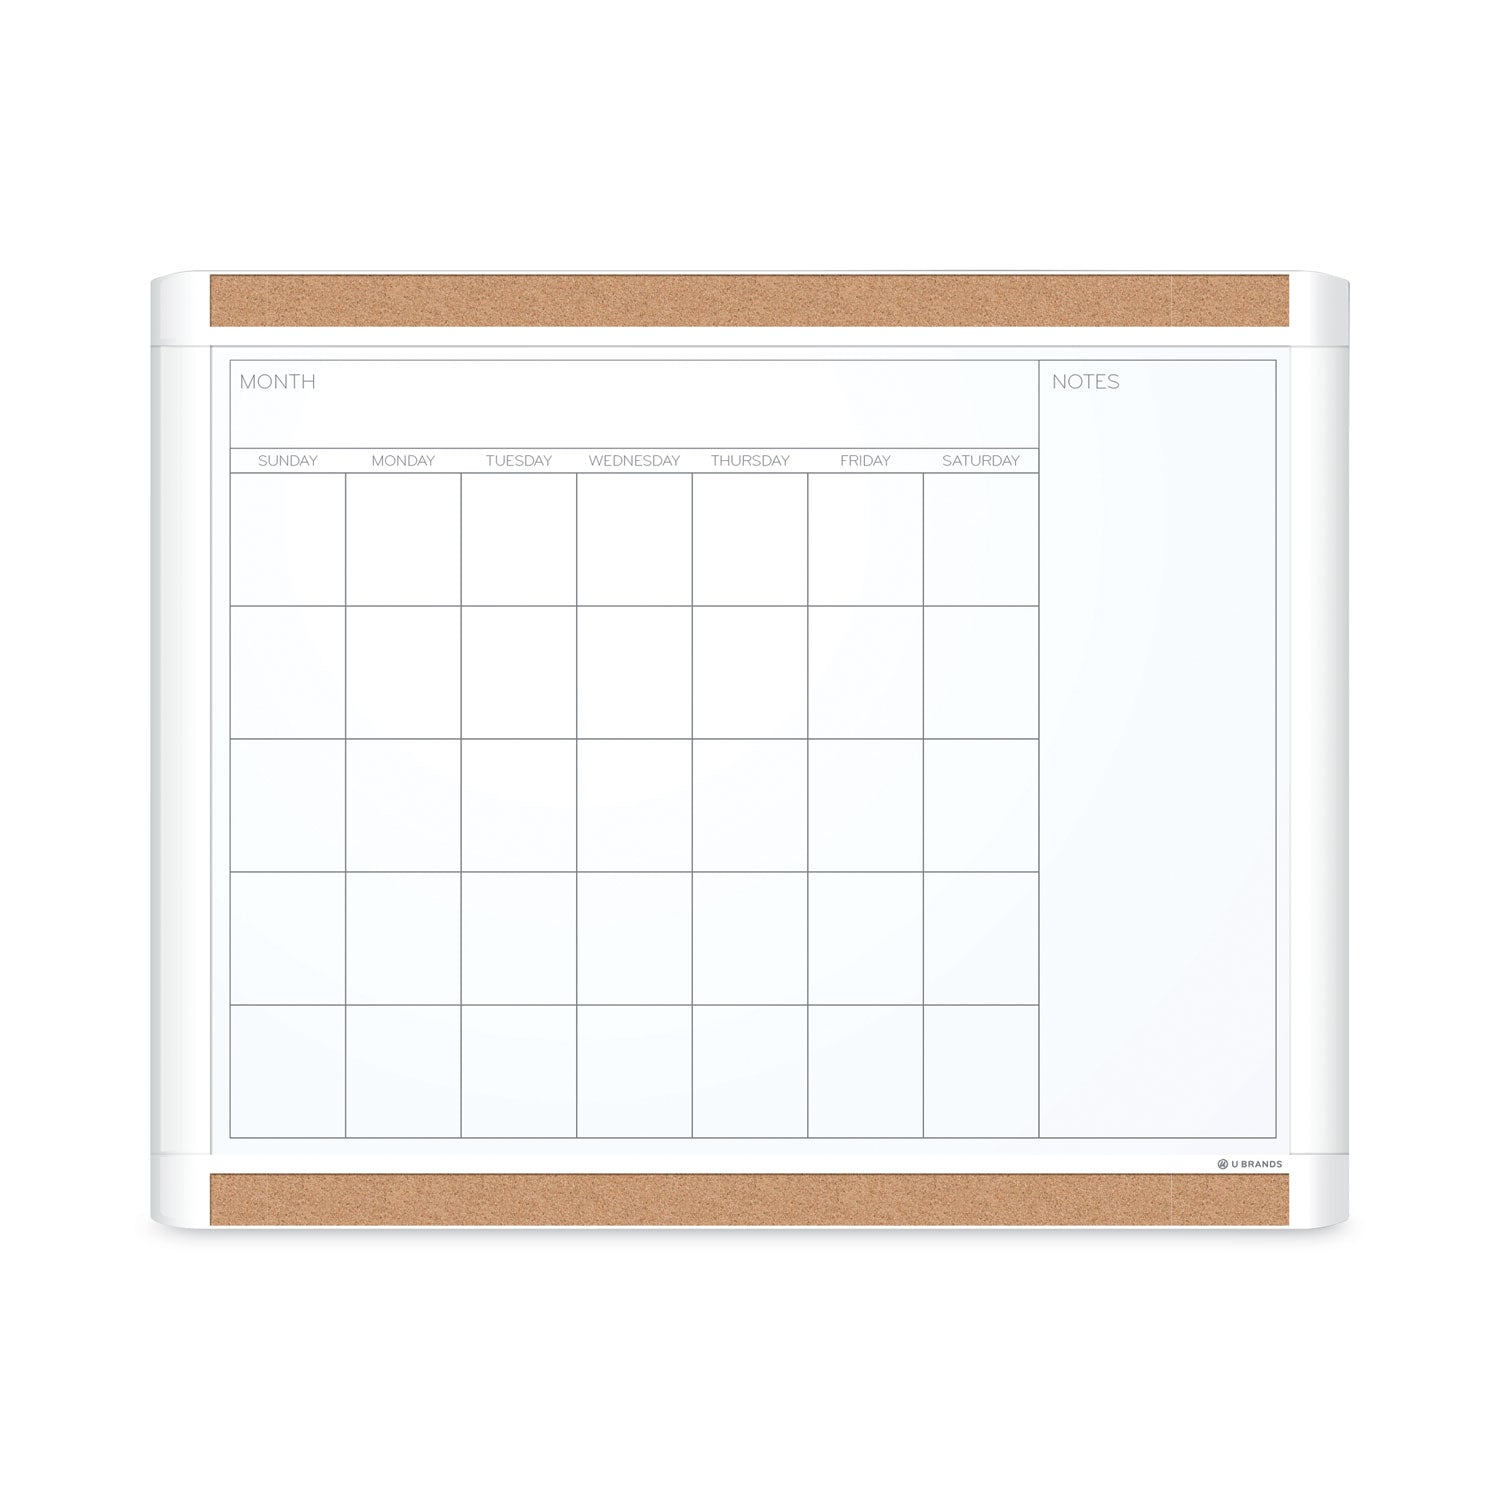 pinit-magnetic-dry-erase-calendar-with-plastic-frame-one-month-20-x-16-white-surface-white-plastic-frame_ubr437u0001 - 1